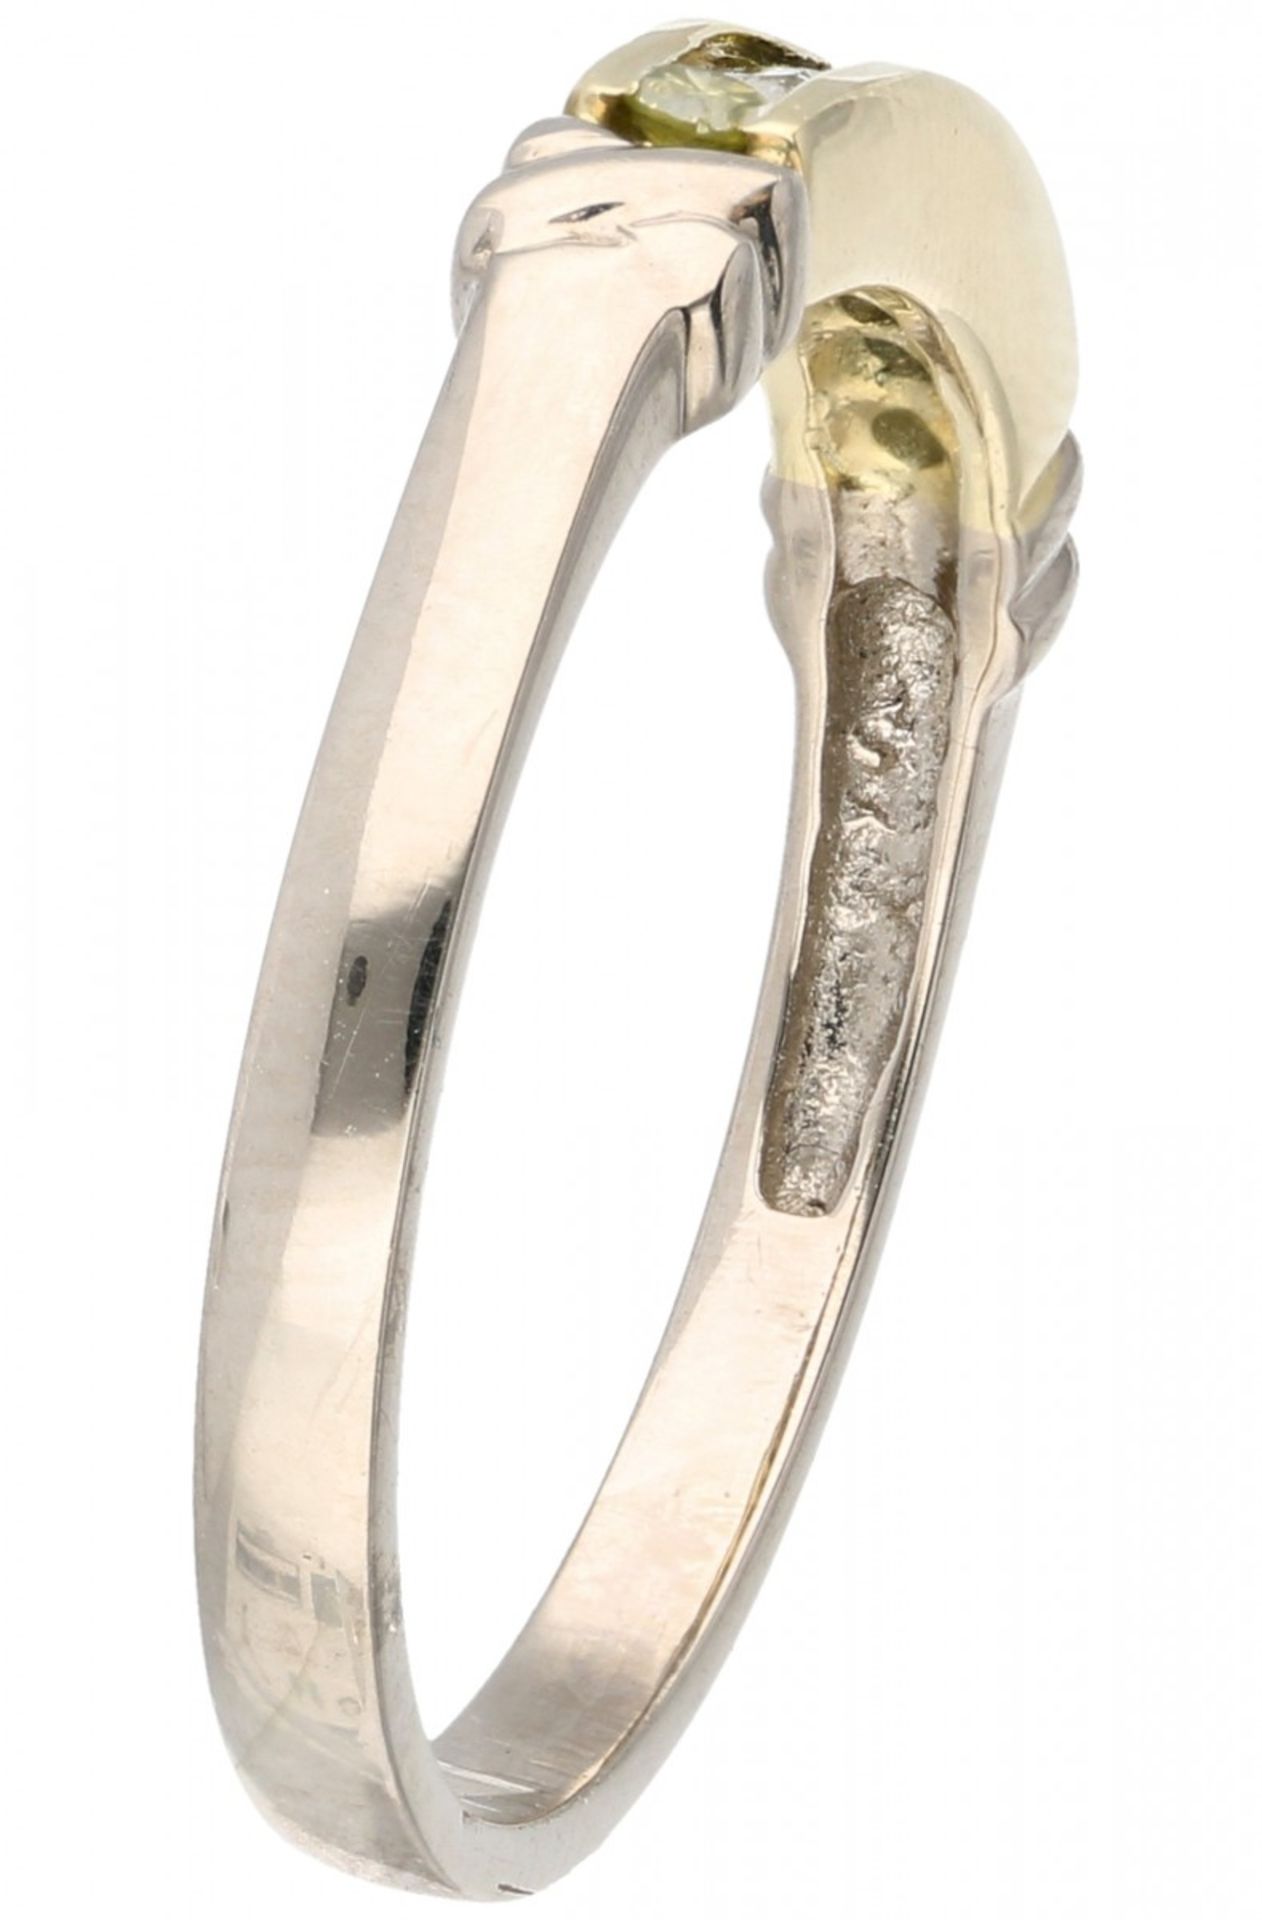 White gold ring set with approx. 0.18 ct. diamond - 14 ct. - Image 2 of 2